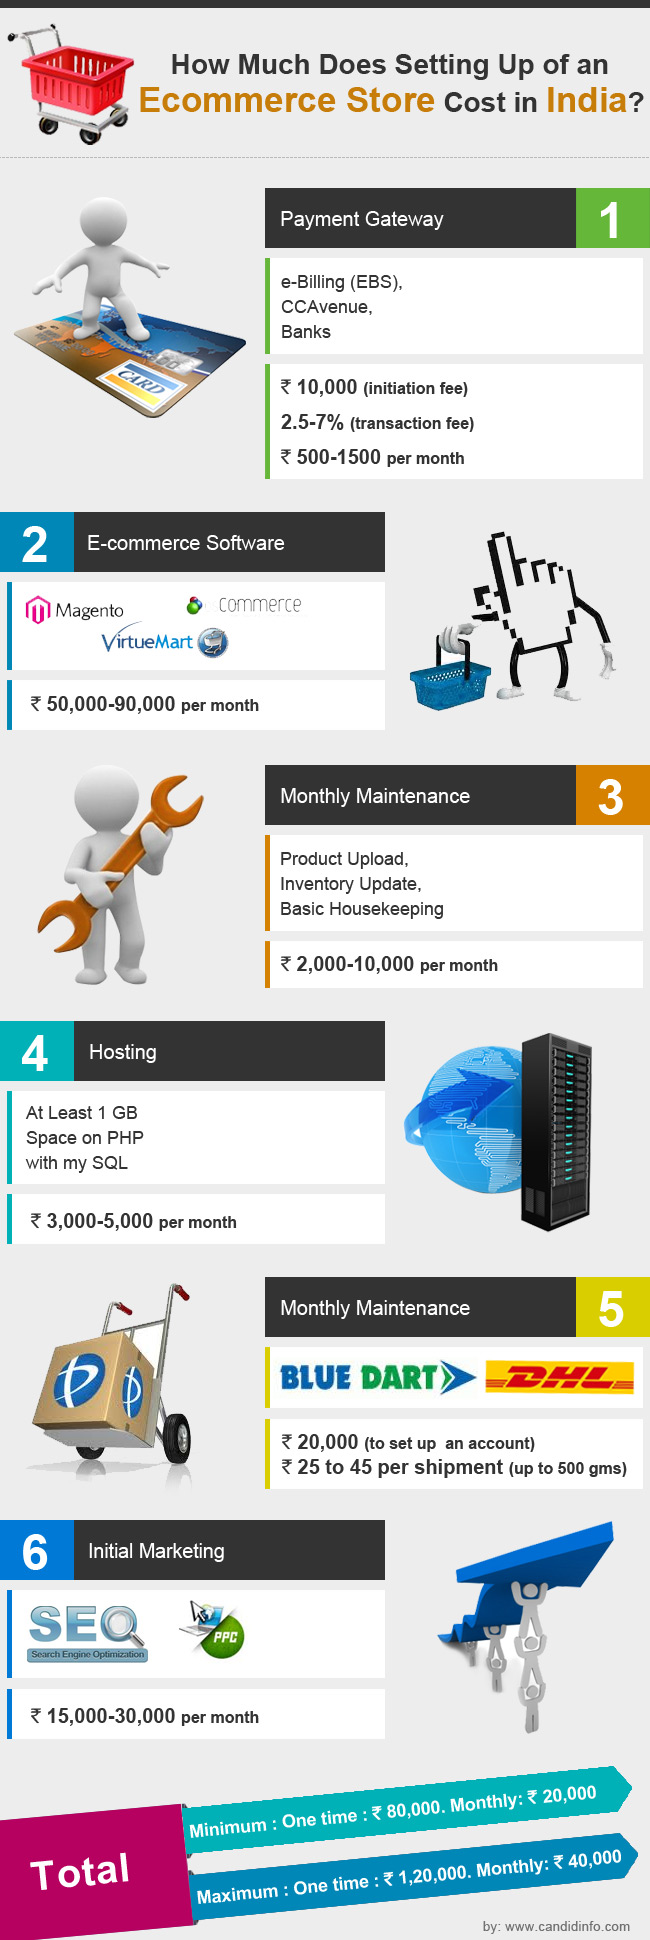 How Much Does It Cost To Build an Ecommerce Site - Infographic!